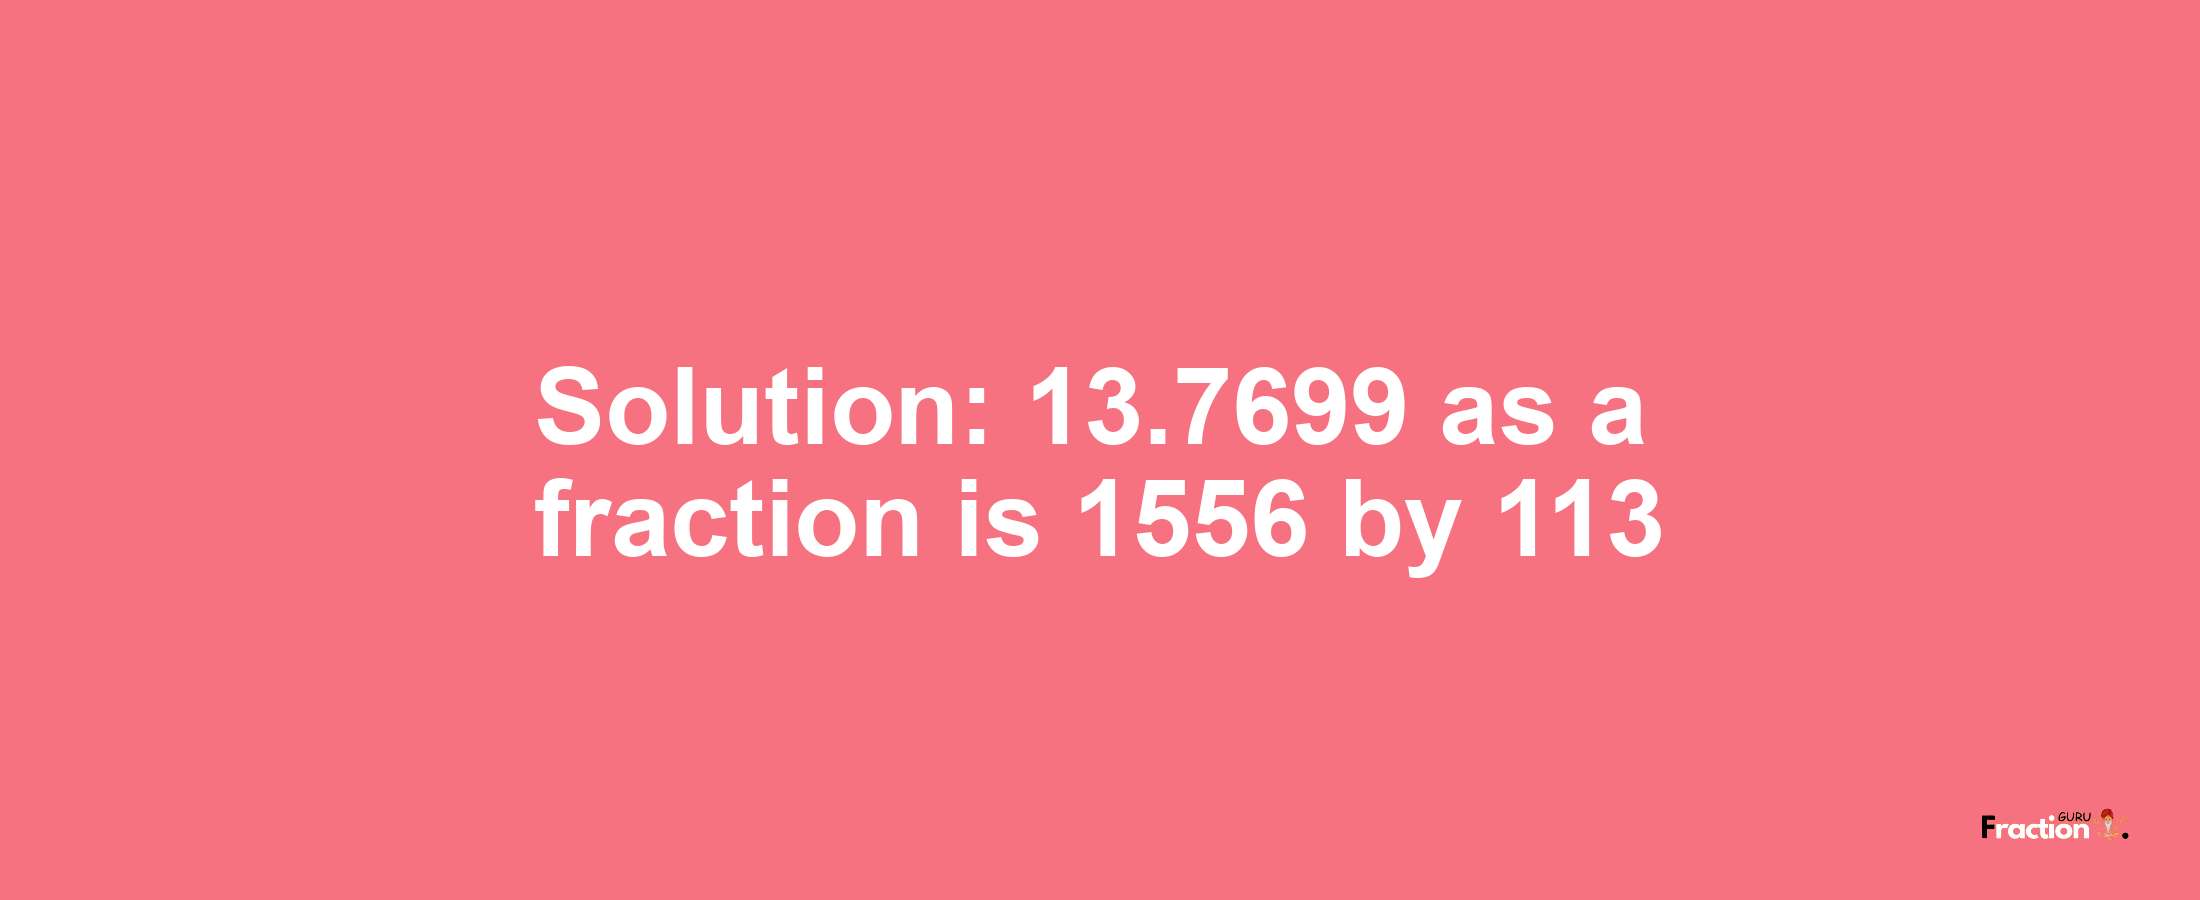 Solution:13.7699 as a fraction is 1556/113